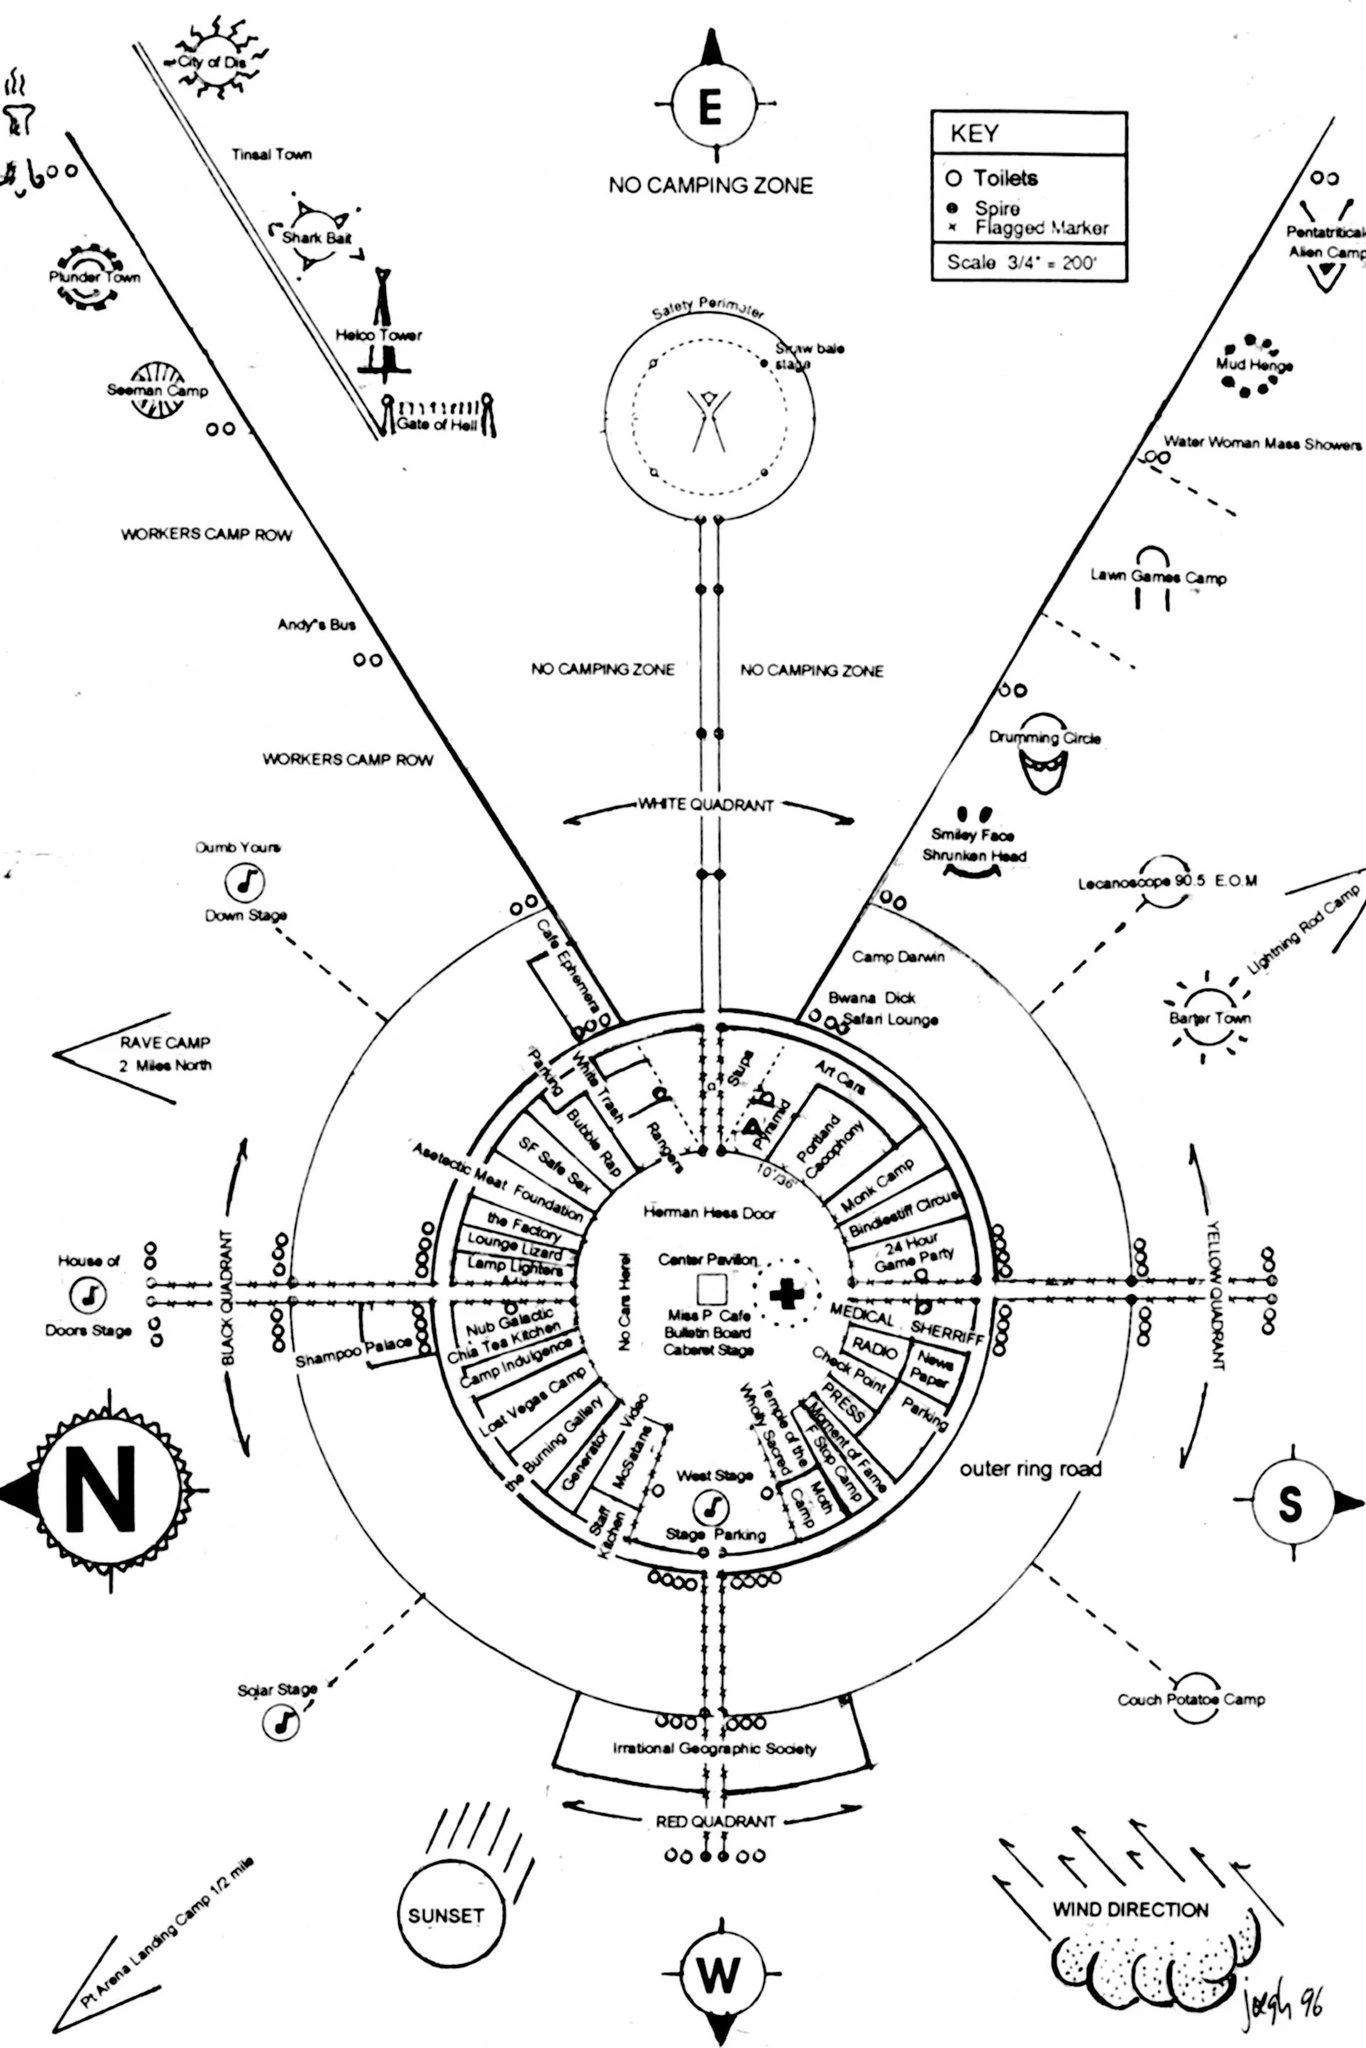 The 1996 plan for Black Rock City Burning Man Project